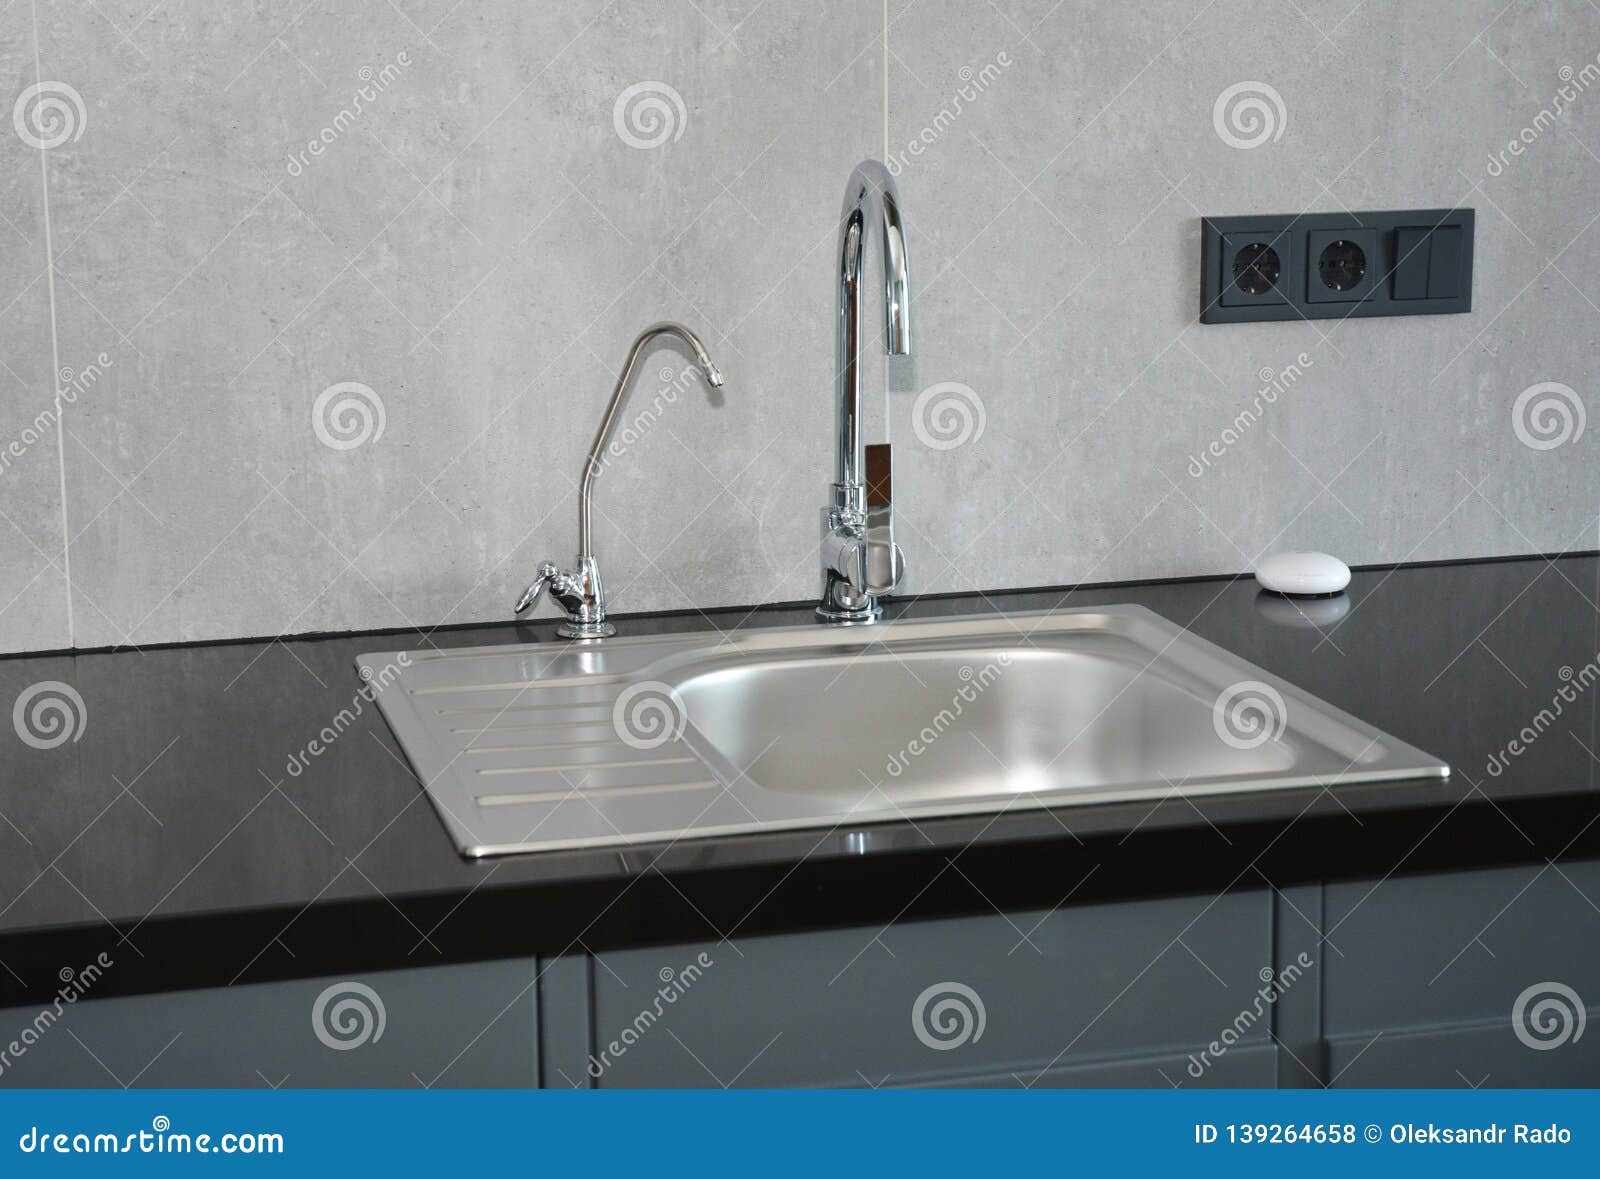 Modern Kitchen With Faucet And Metal Kitchen Sink And Outlets